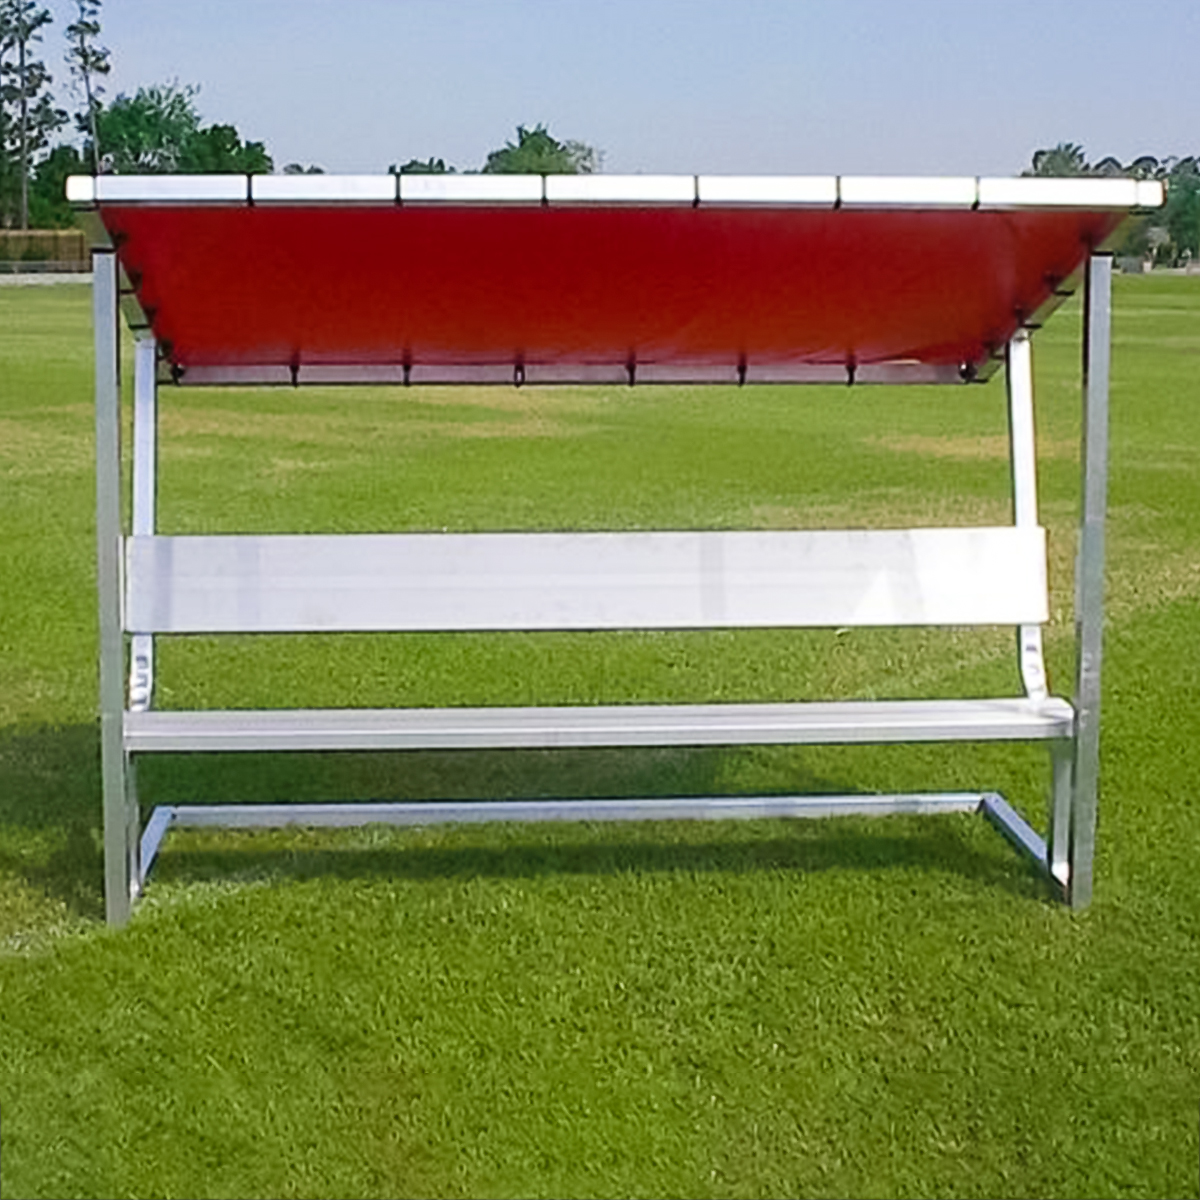 Keeper Bench Athletic Covered Team Goals Equipment ⋆ - Your Athletic